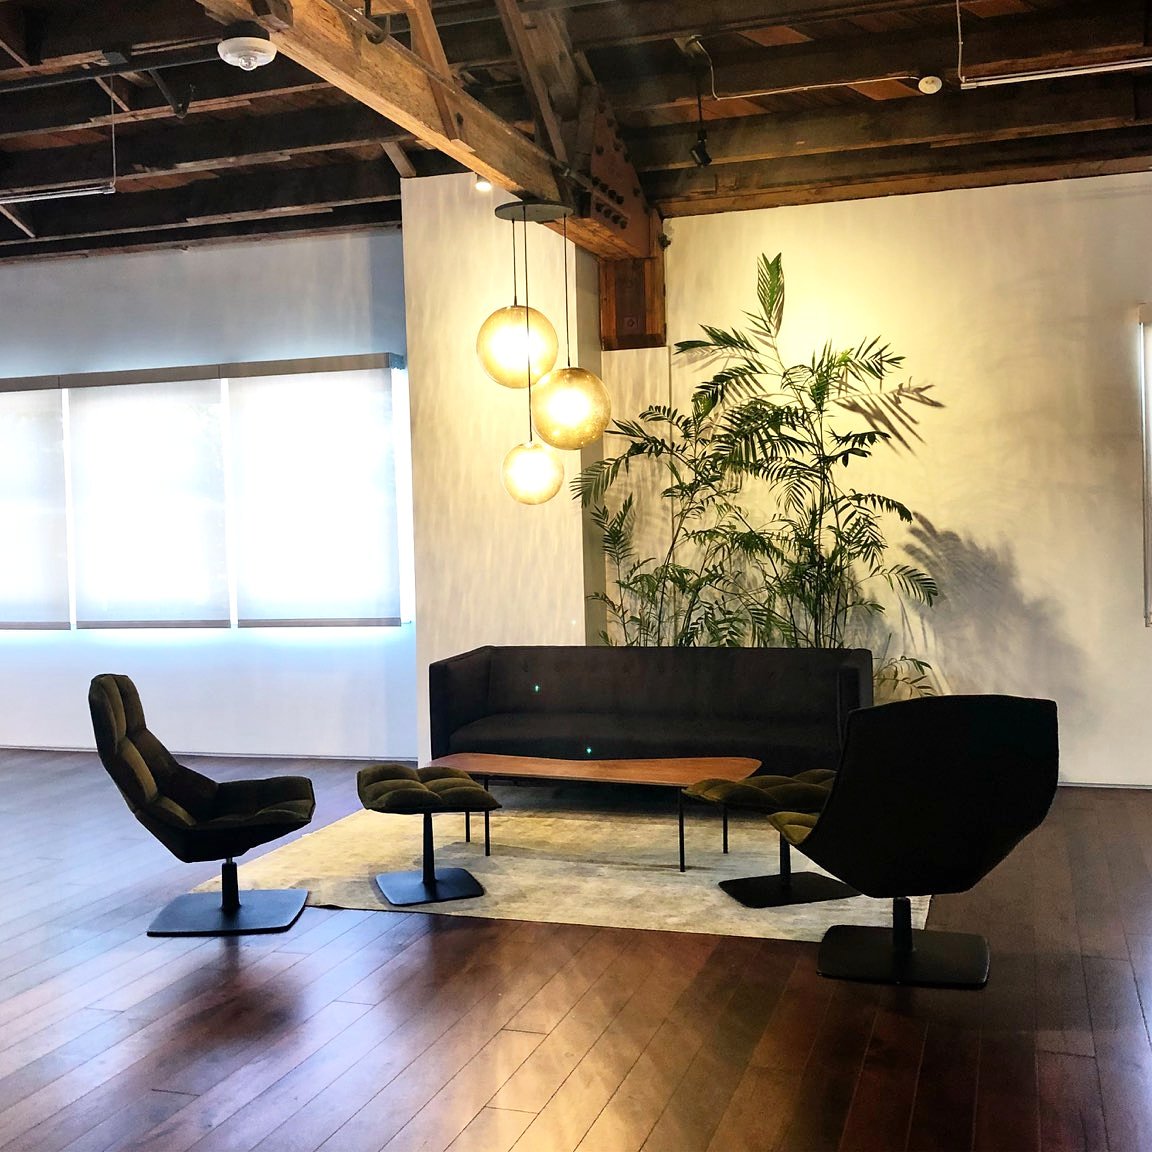 Major deco-envy while hanging at #72andSunny today for our creative careers boot-camp. #creatives #design #Careeradvice #realworldlearning #circleofinfluence